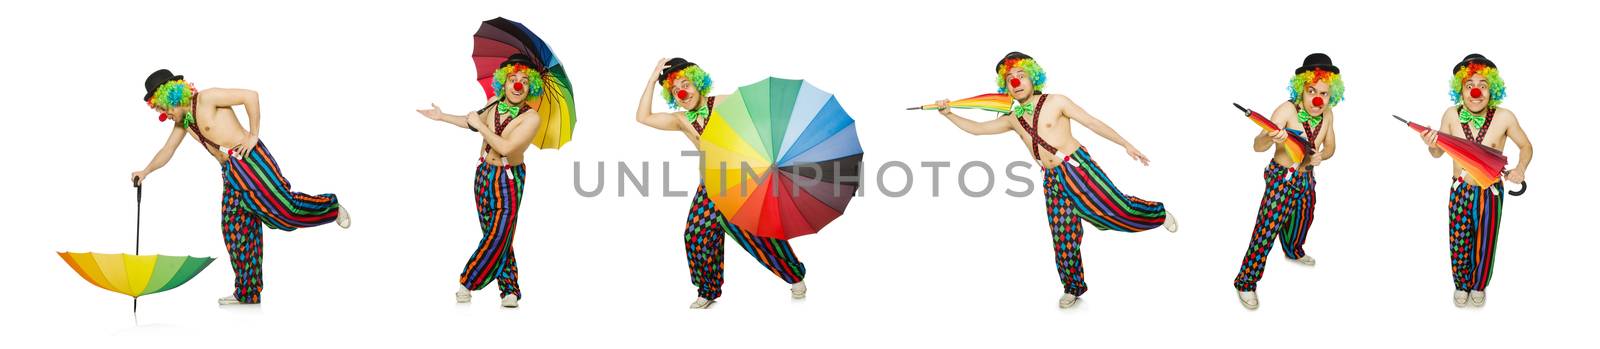 Clown with umbrella isolated on white by Elnur